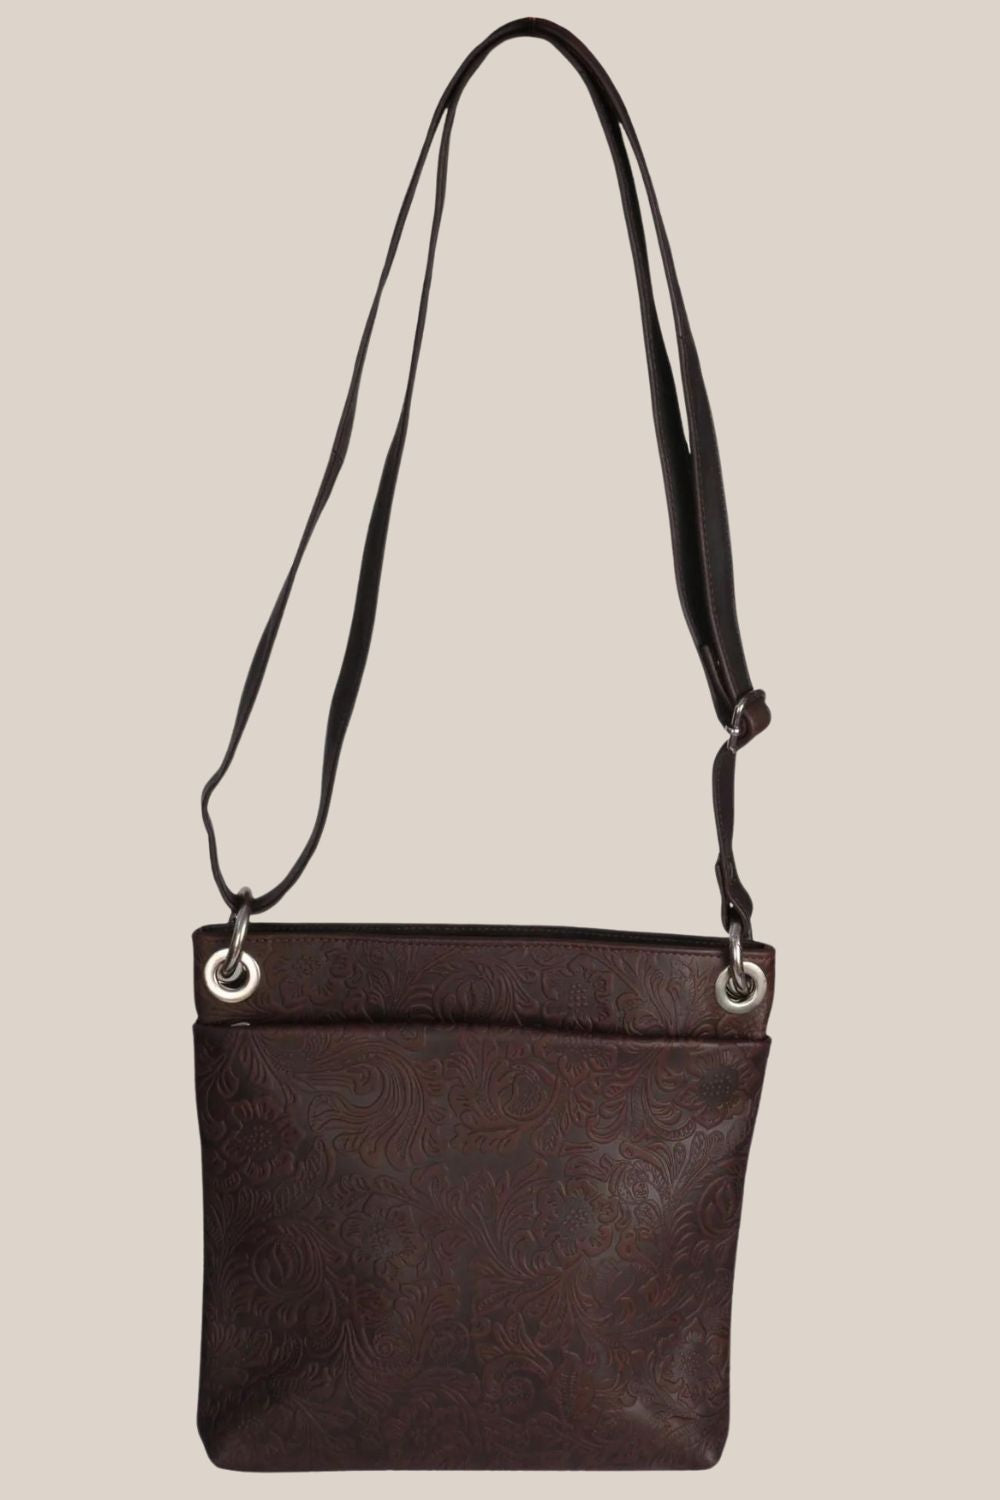 Cenzoni Floral Embossed Leather Bag